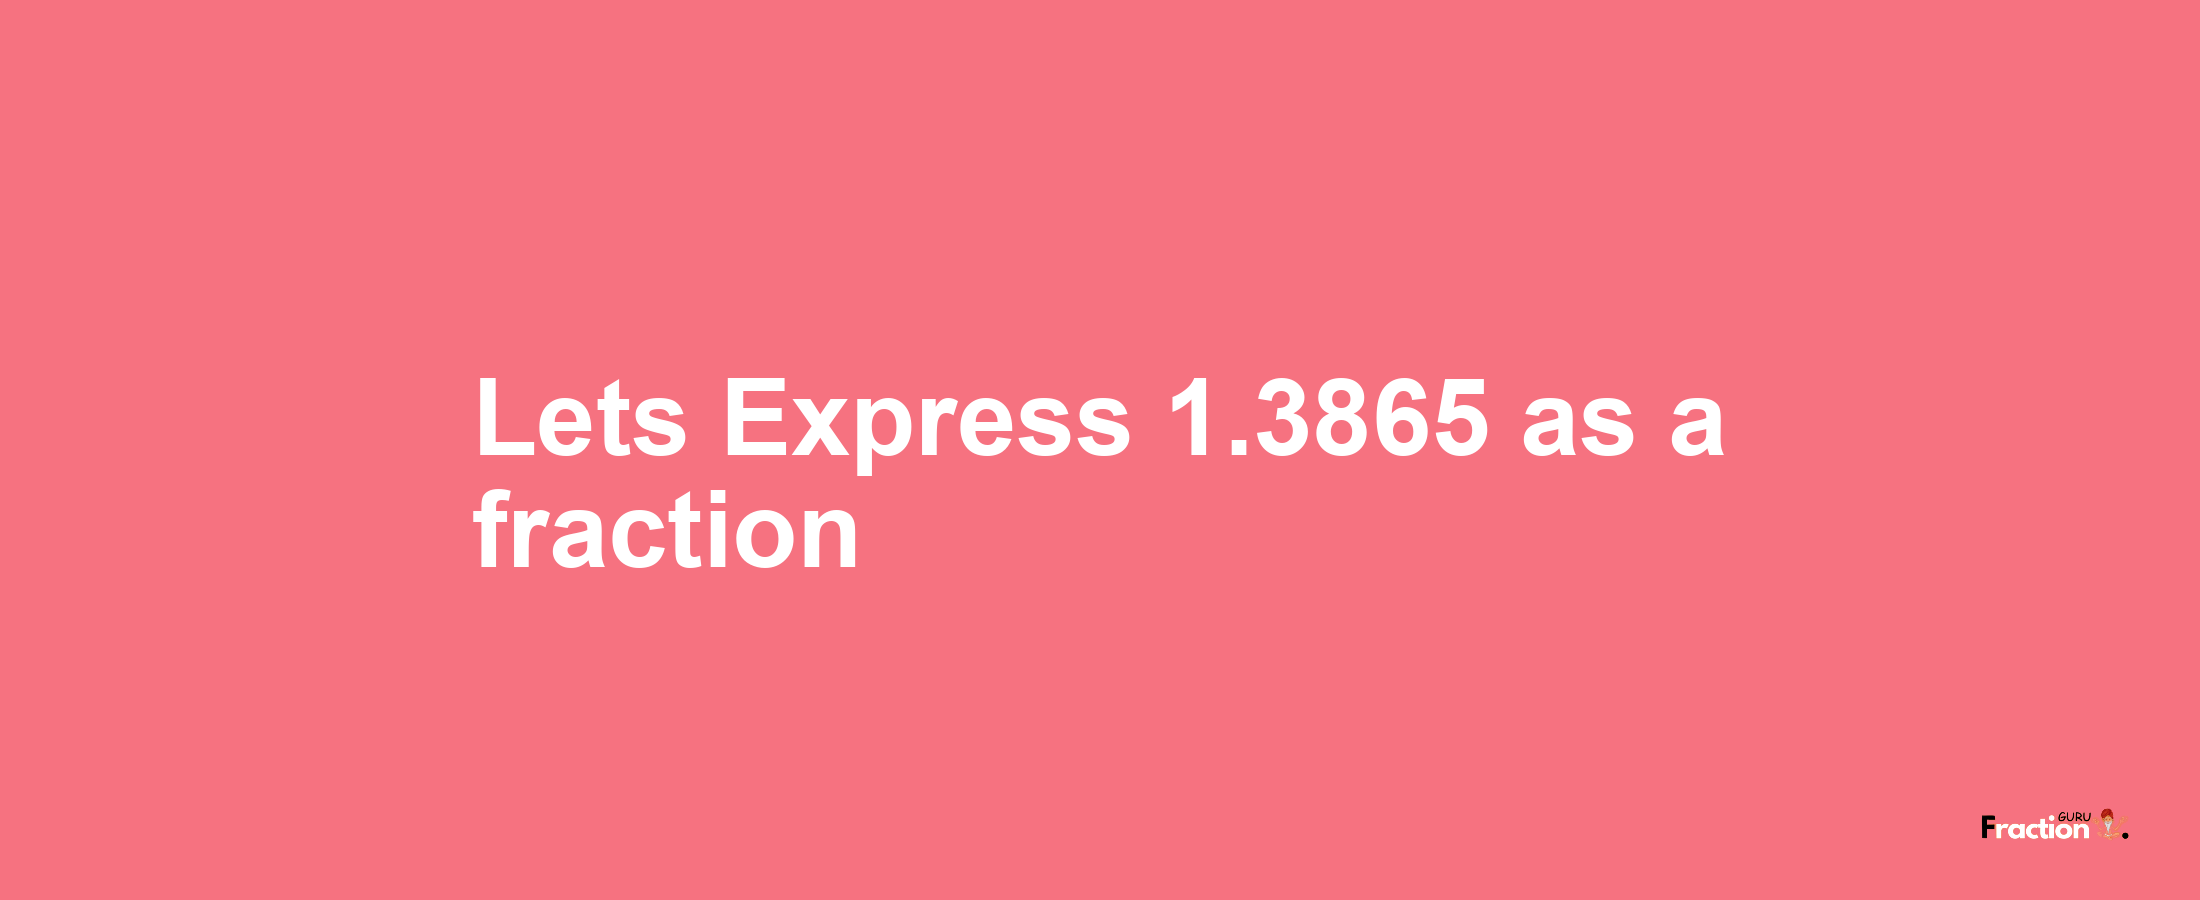 Lets Express 1.3865 as afraction